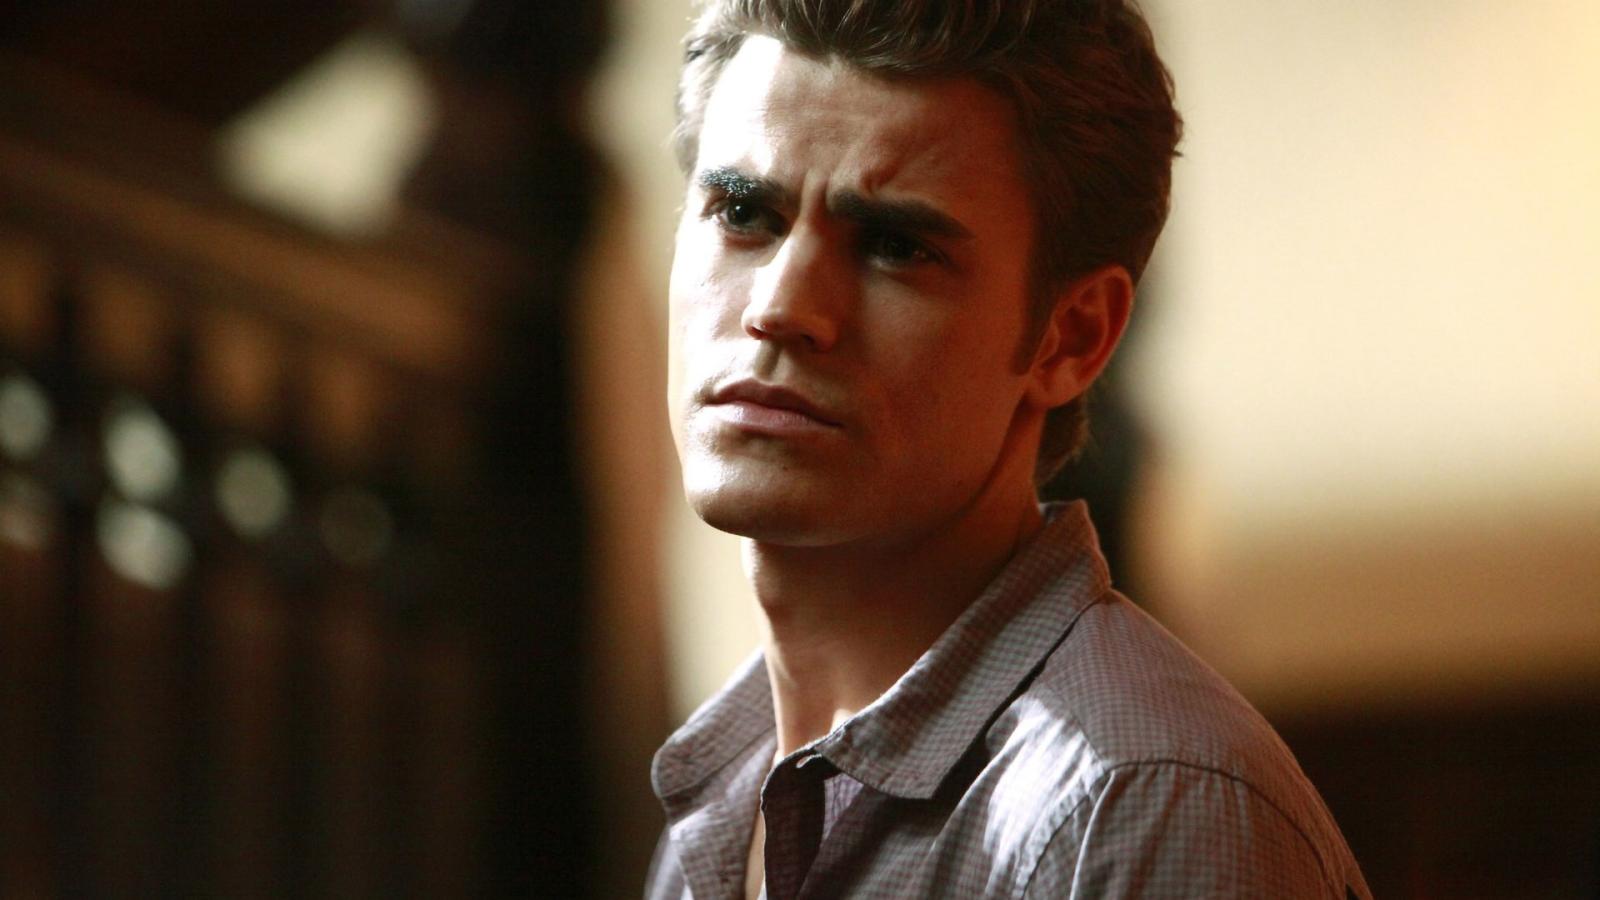 Vampire Diaries Characters vs Cast Real Age Raises Some Eyebrows - image 10